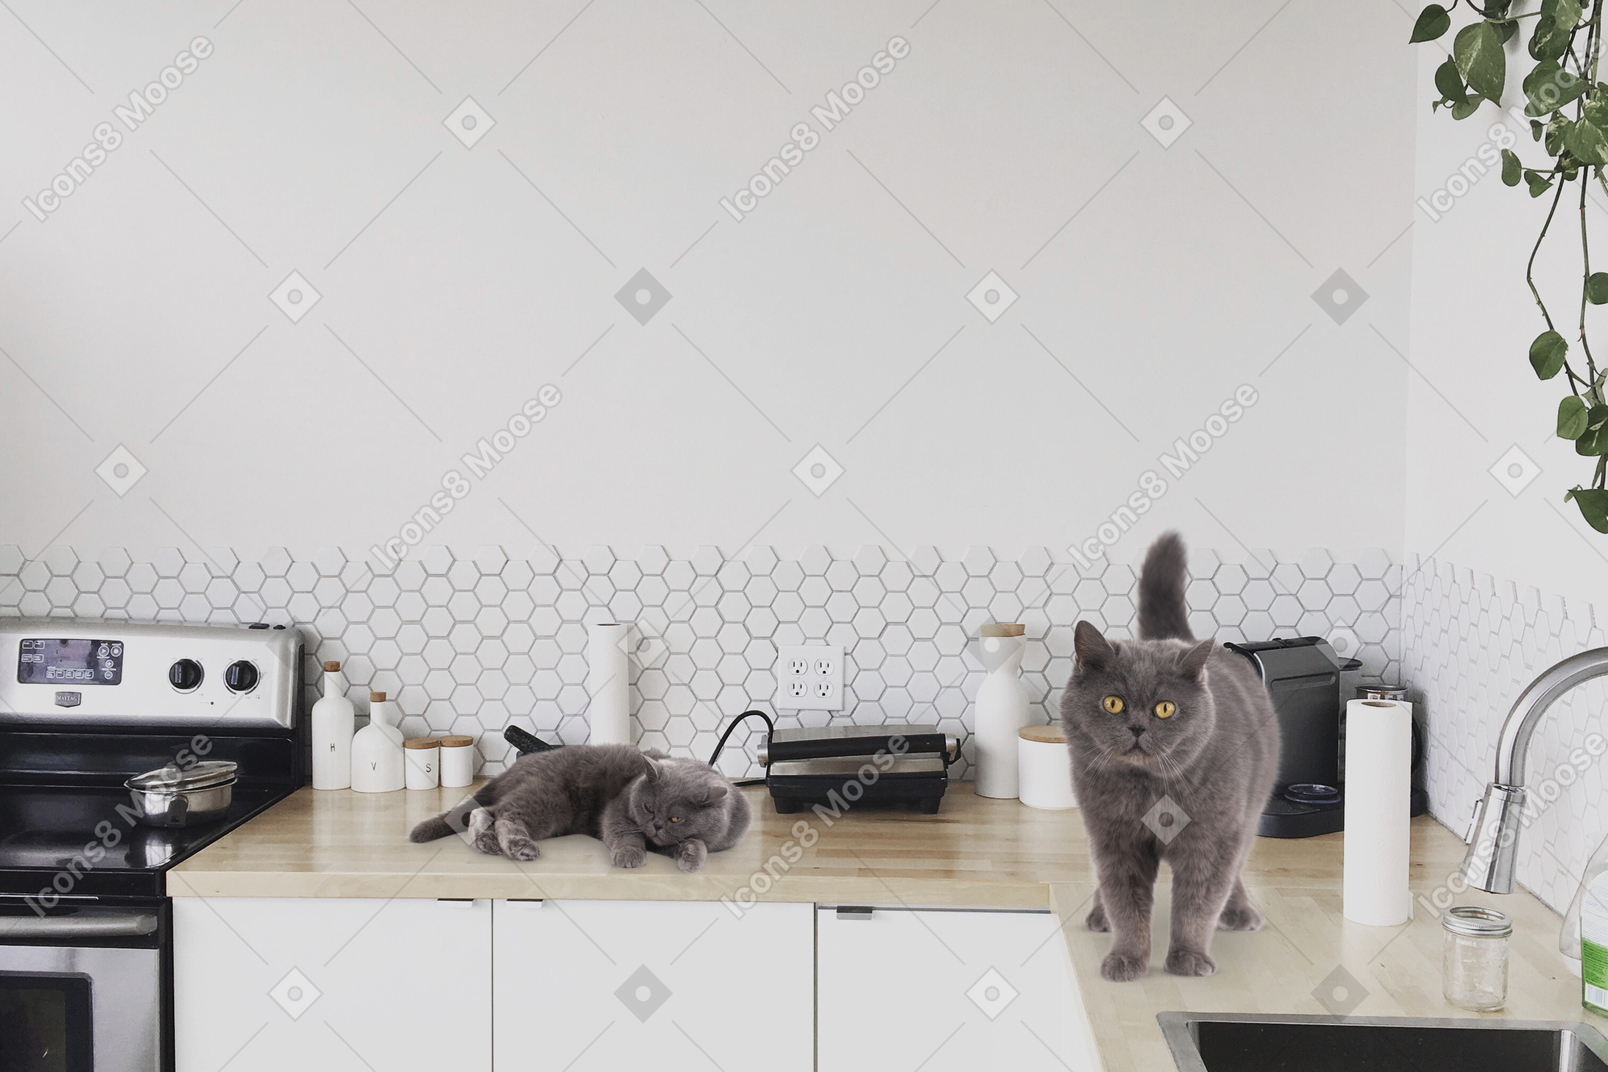 Two grey cats on kitchen counter